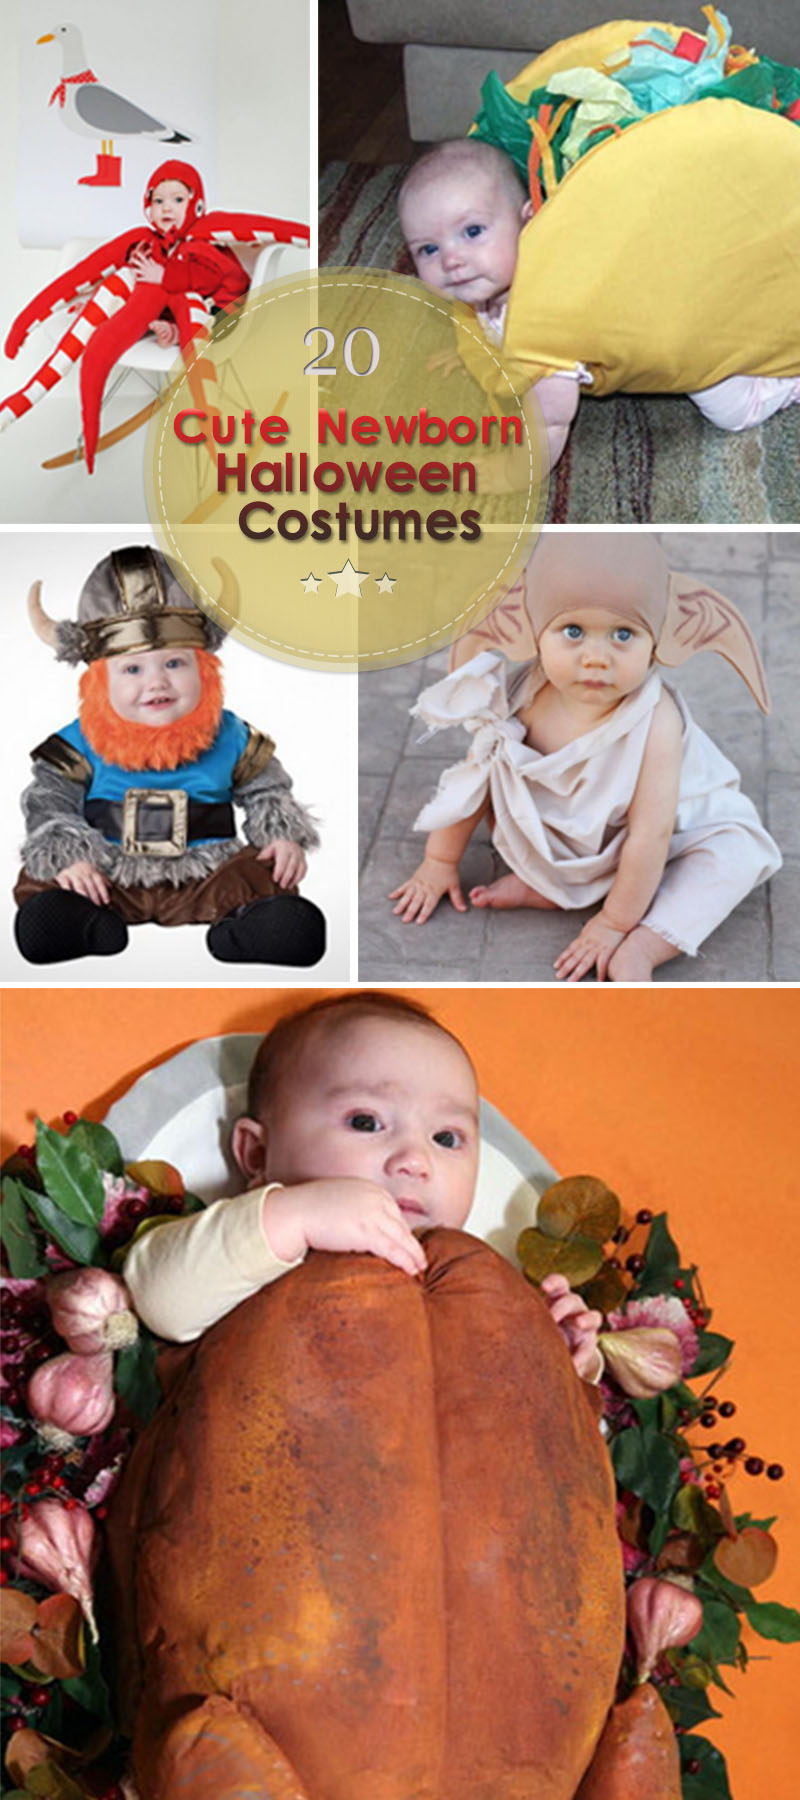 Cute Newborn Halloween Costumes for the little ones in your life!